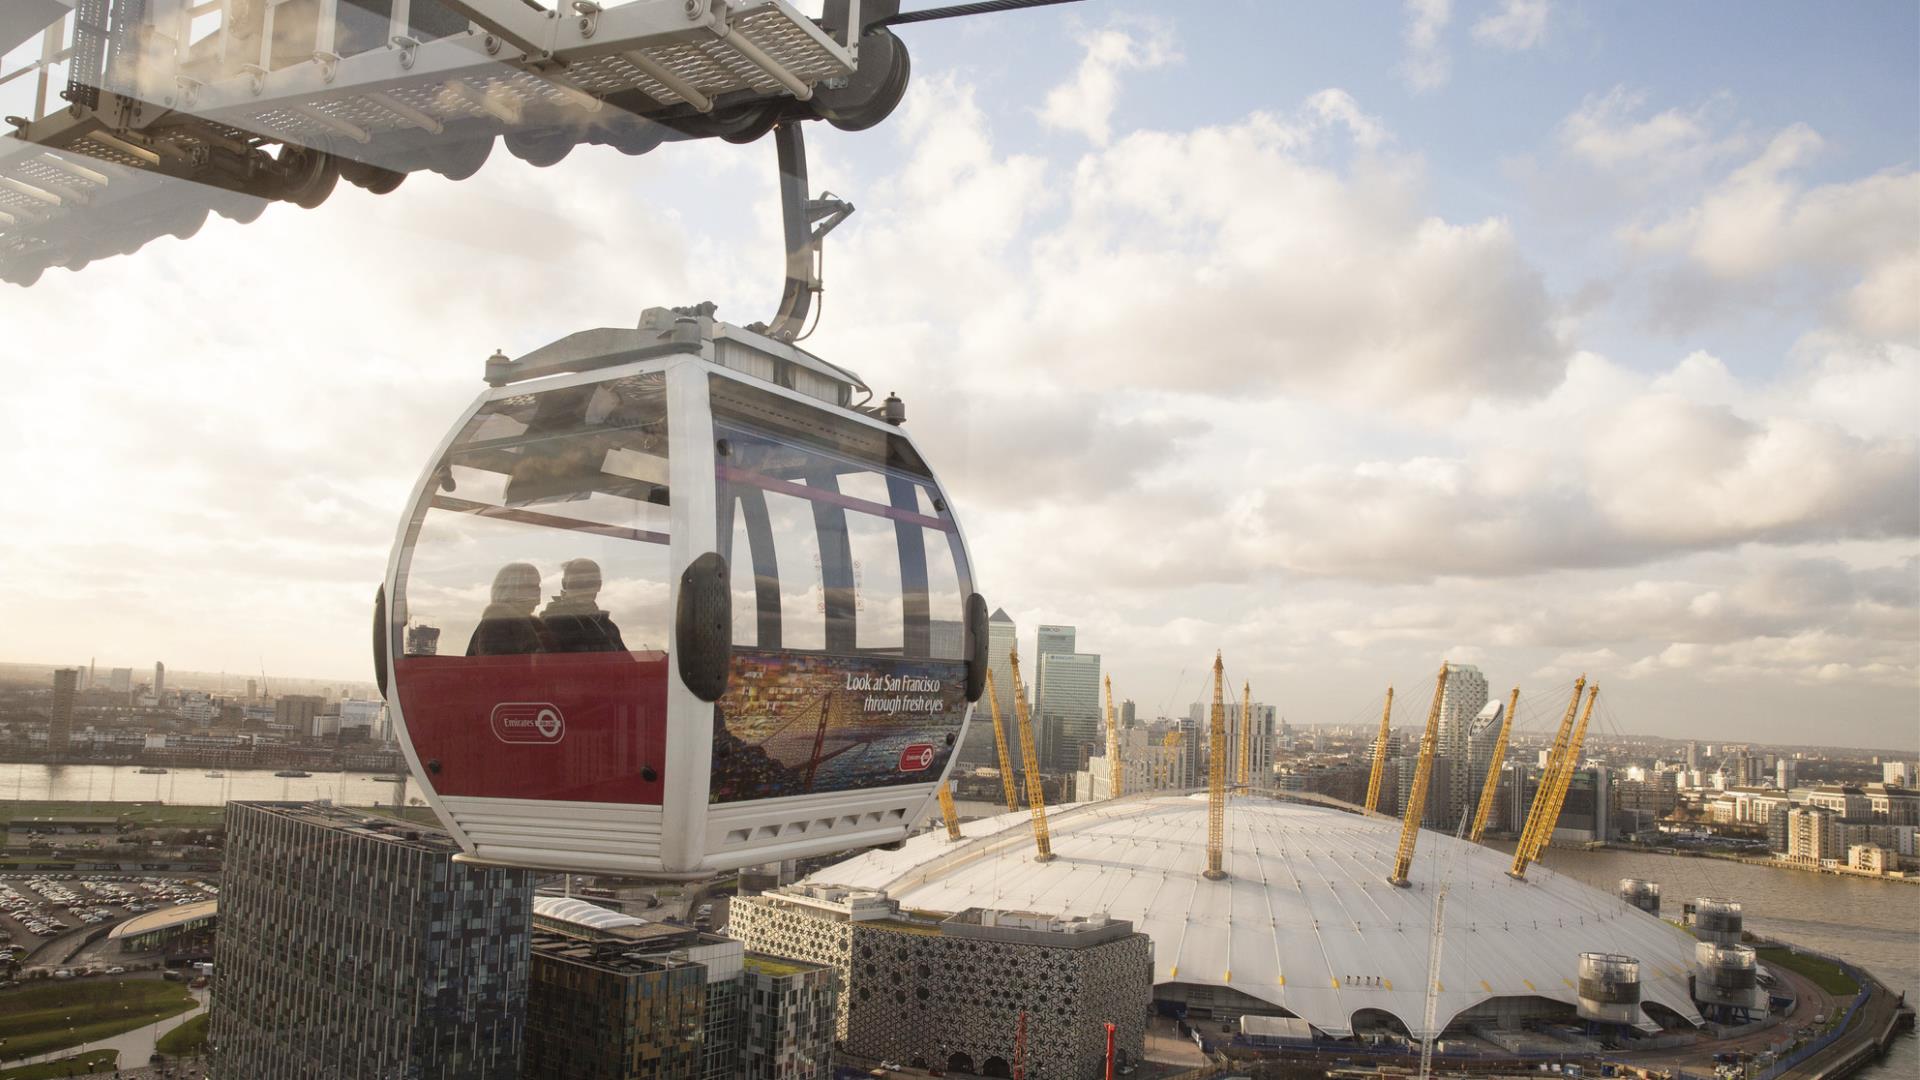 The Emirates Air Line glides through the sky above The O2 and Greenwich Peninsula.